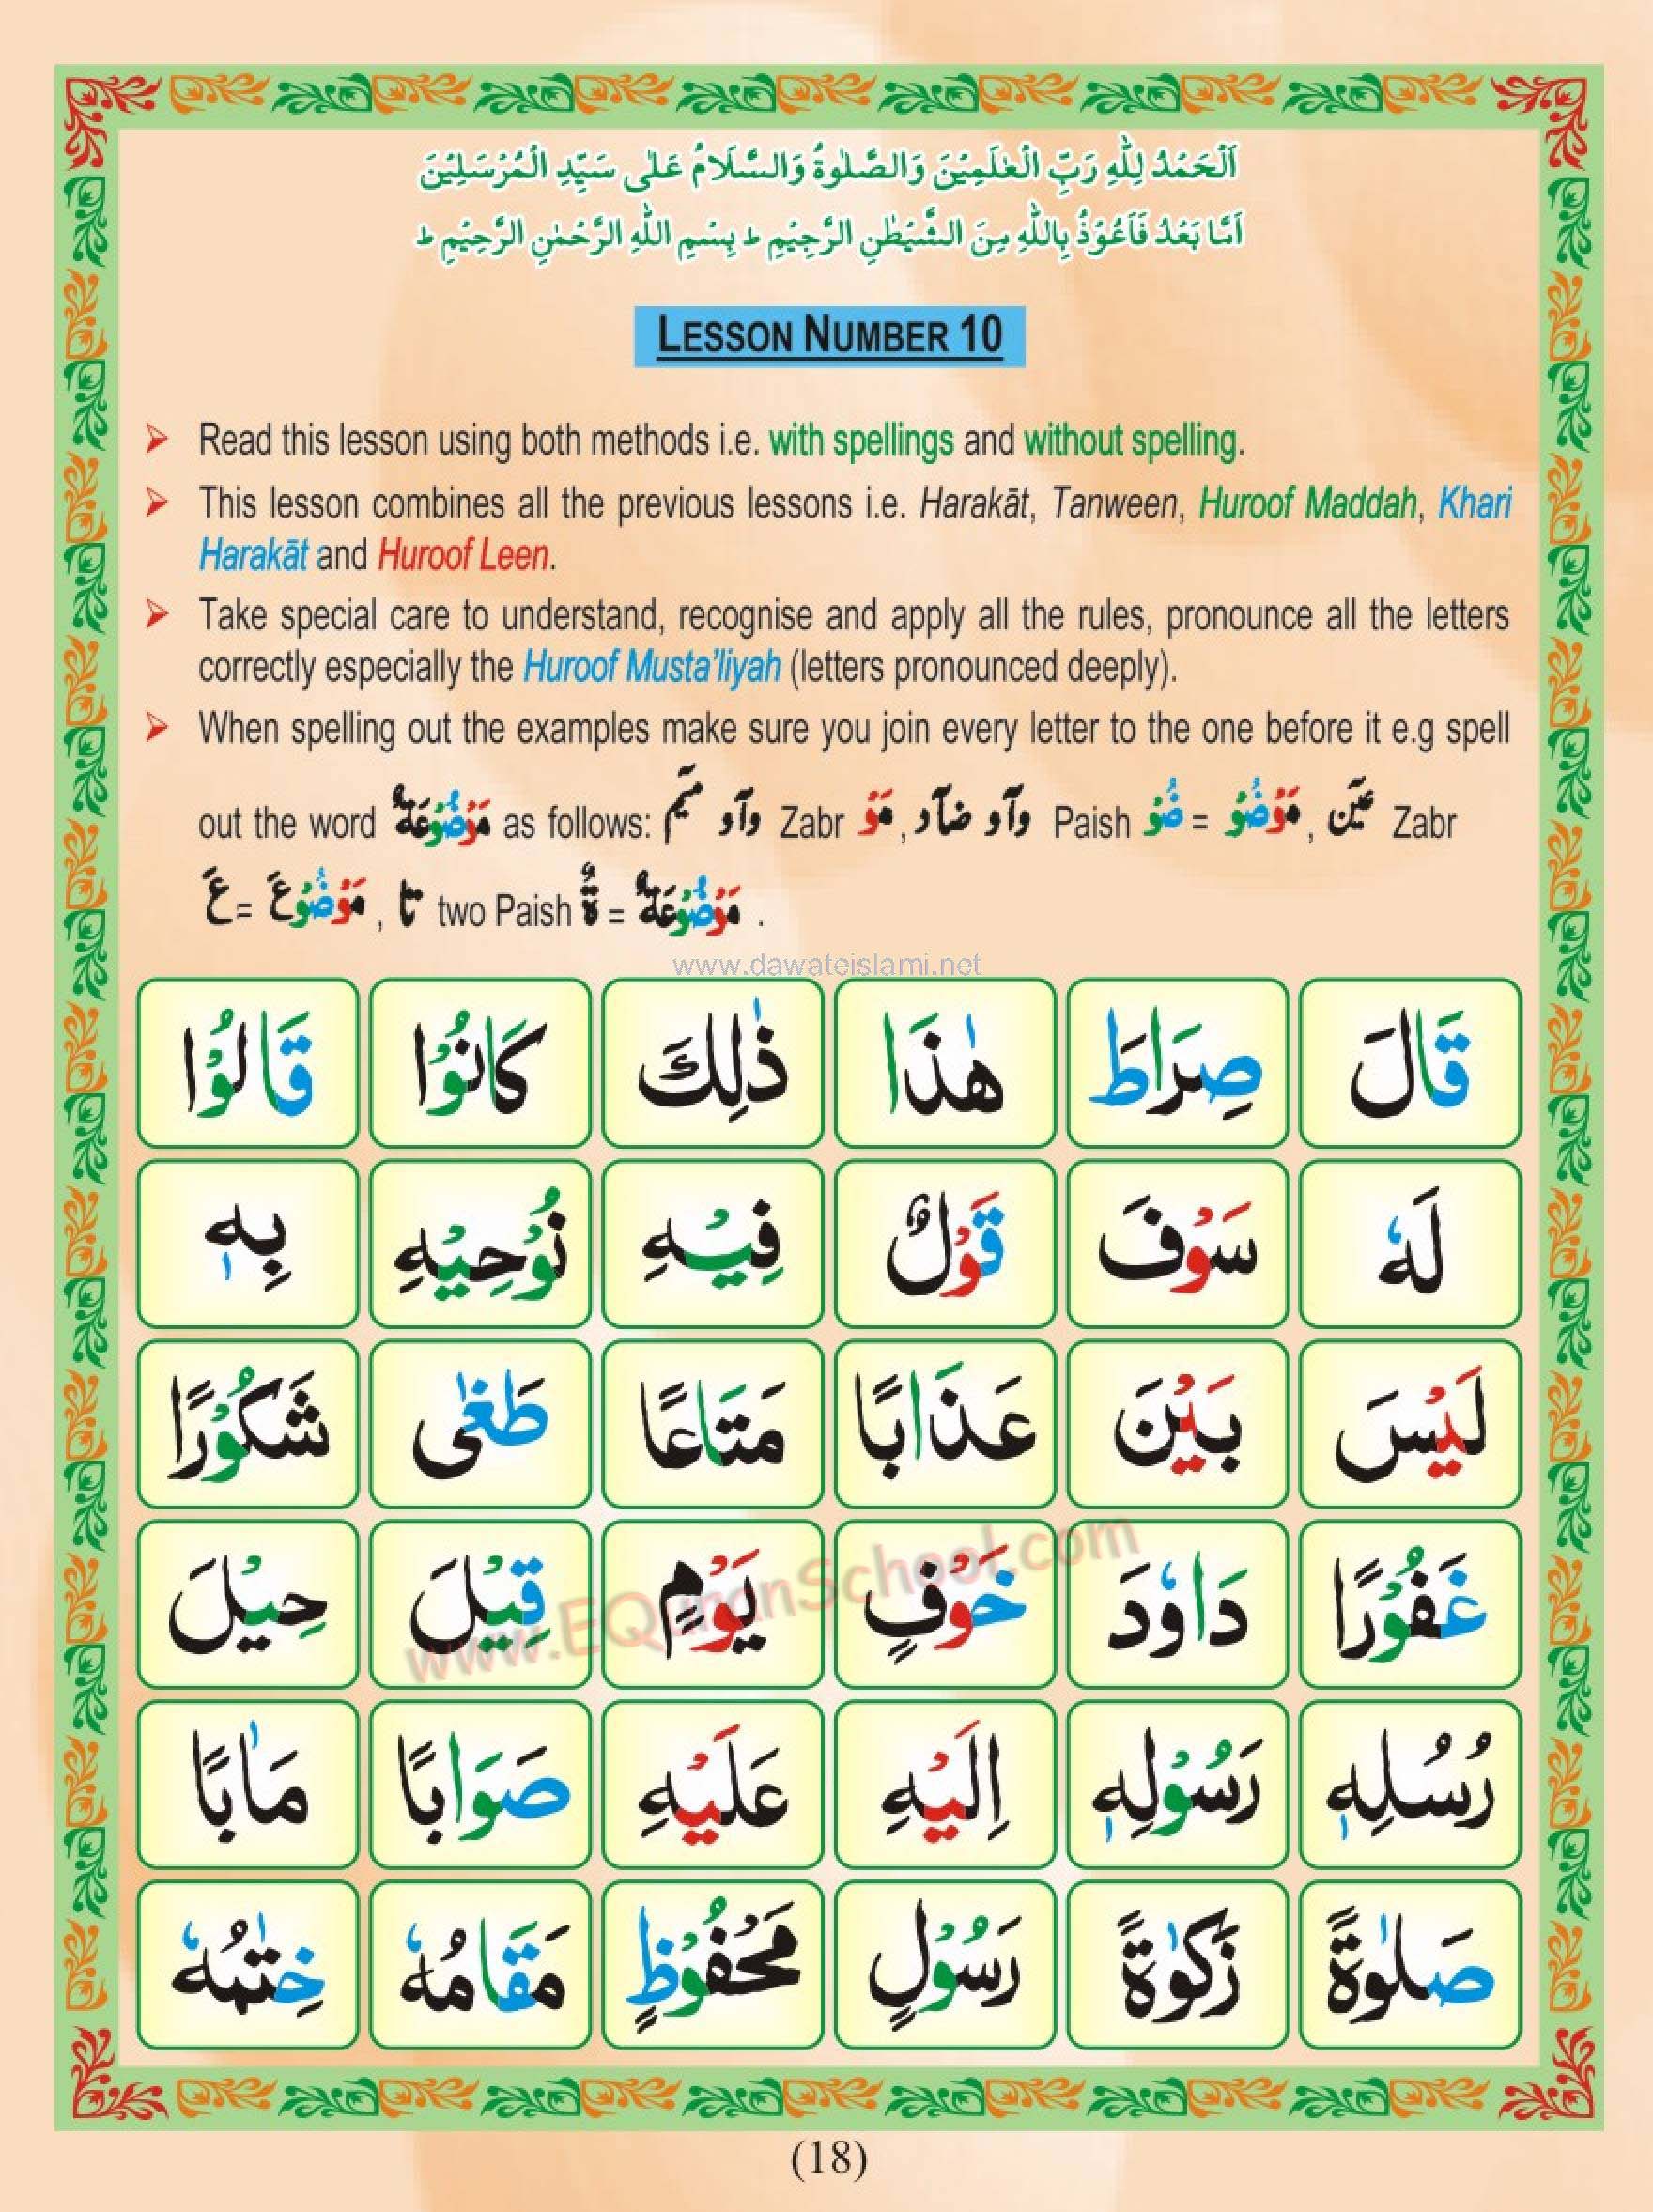 Practise of Harakaat and Huroof e Maddah